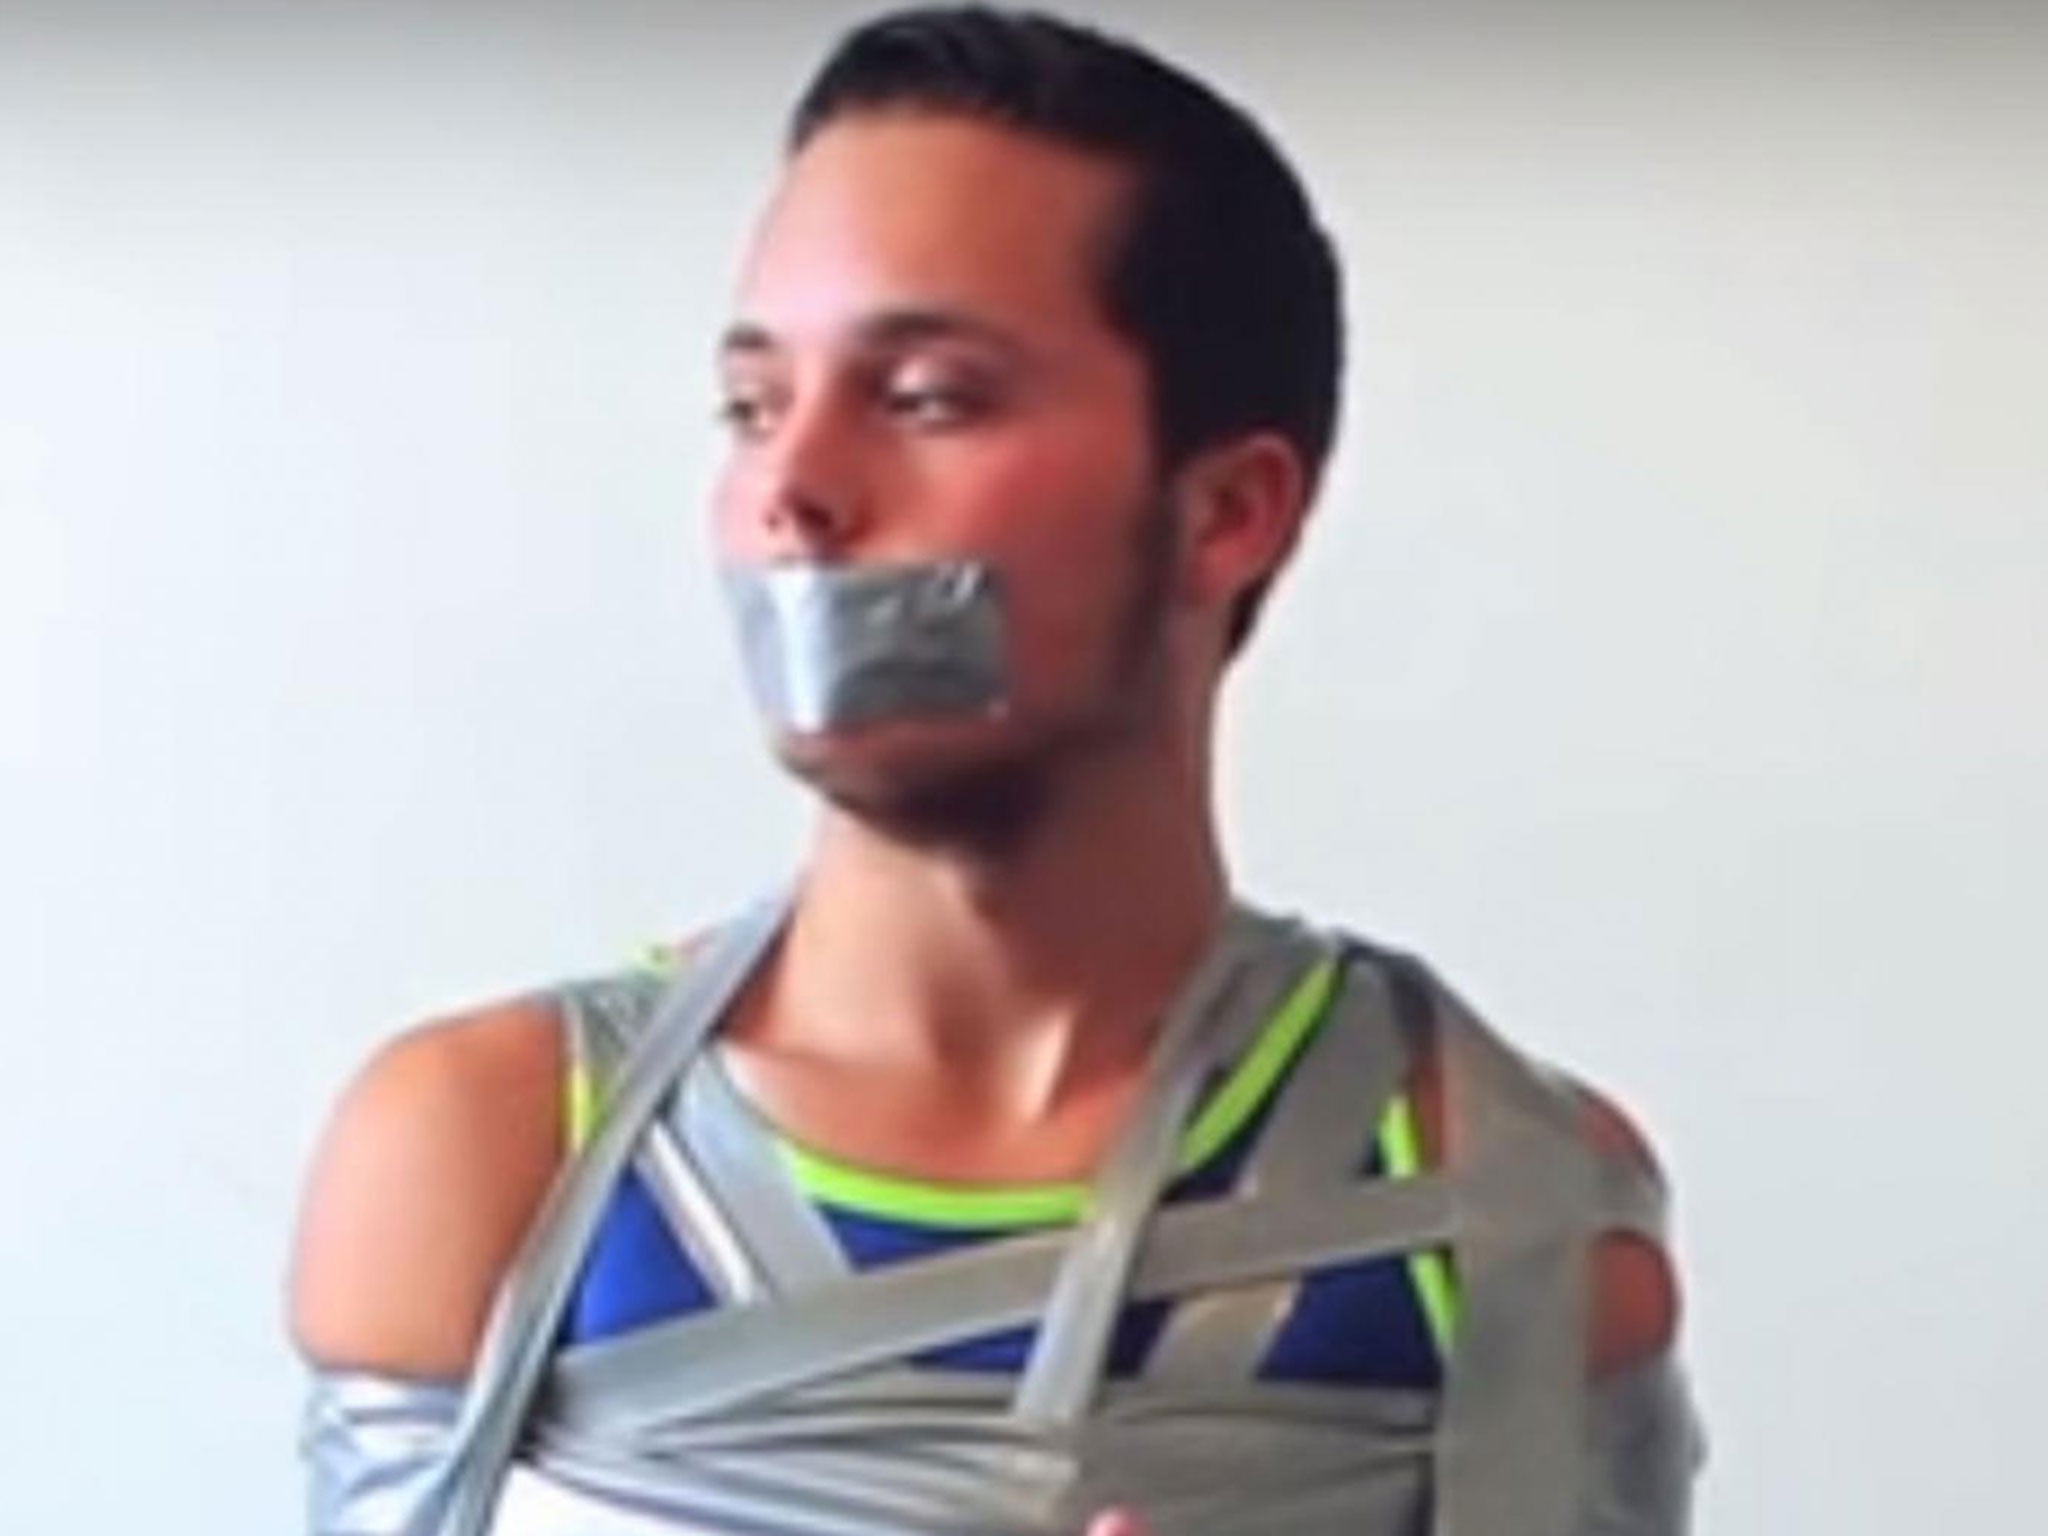 What Parents Should Know About the Duct Tape Challenge